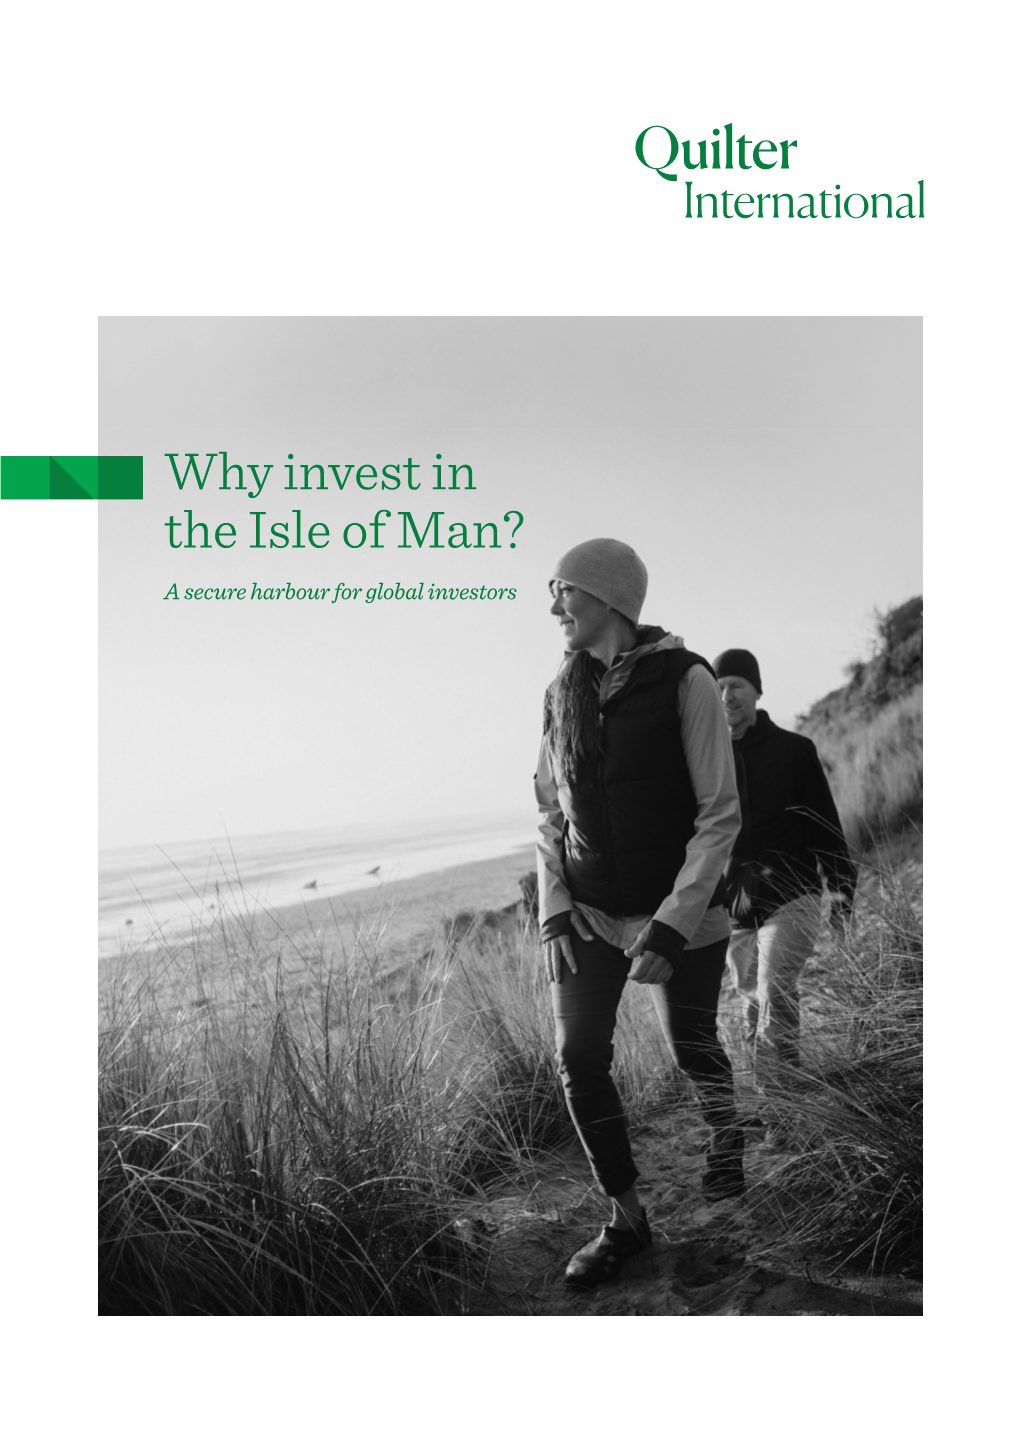 Why Invest in the Isle of Man?